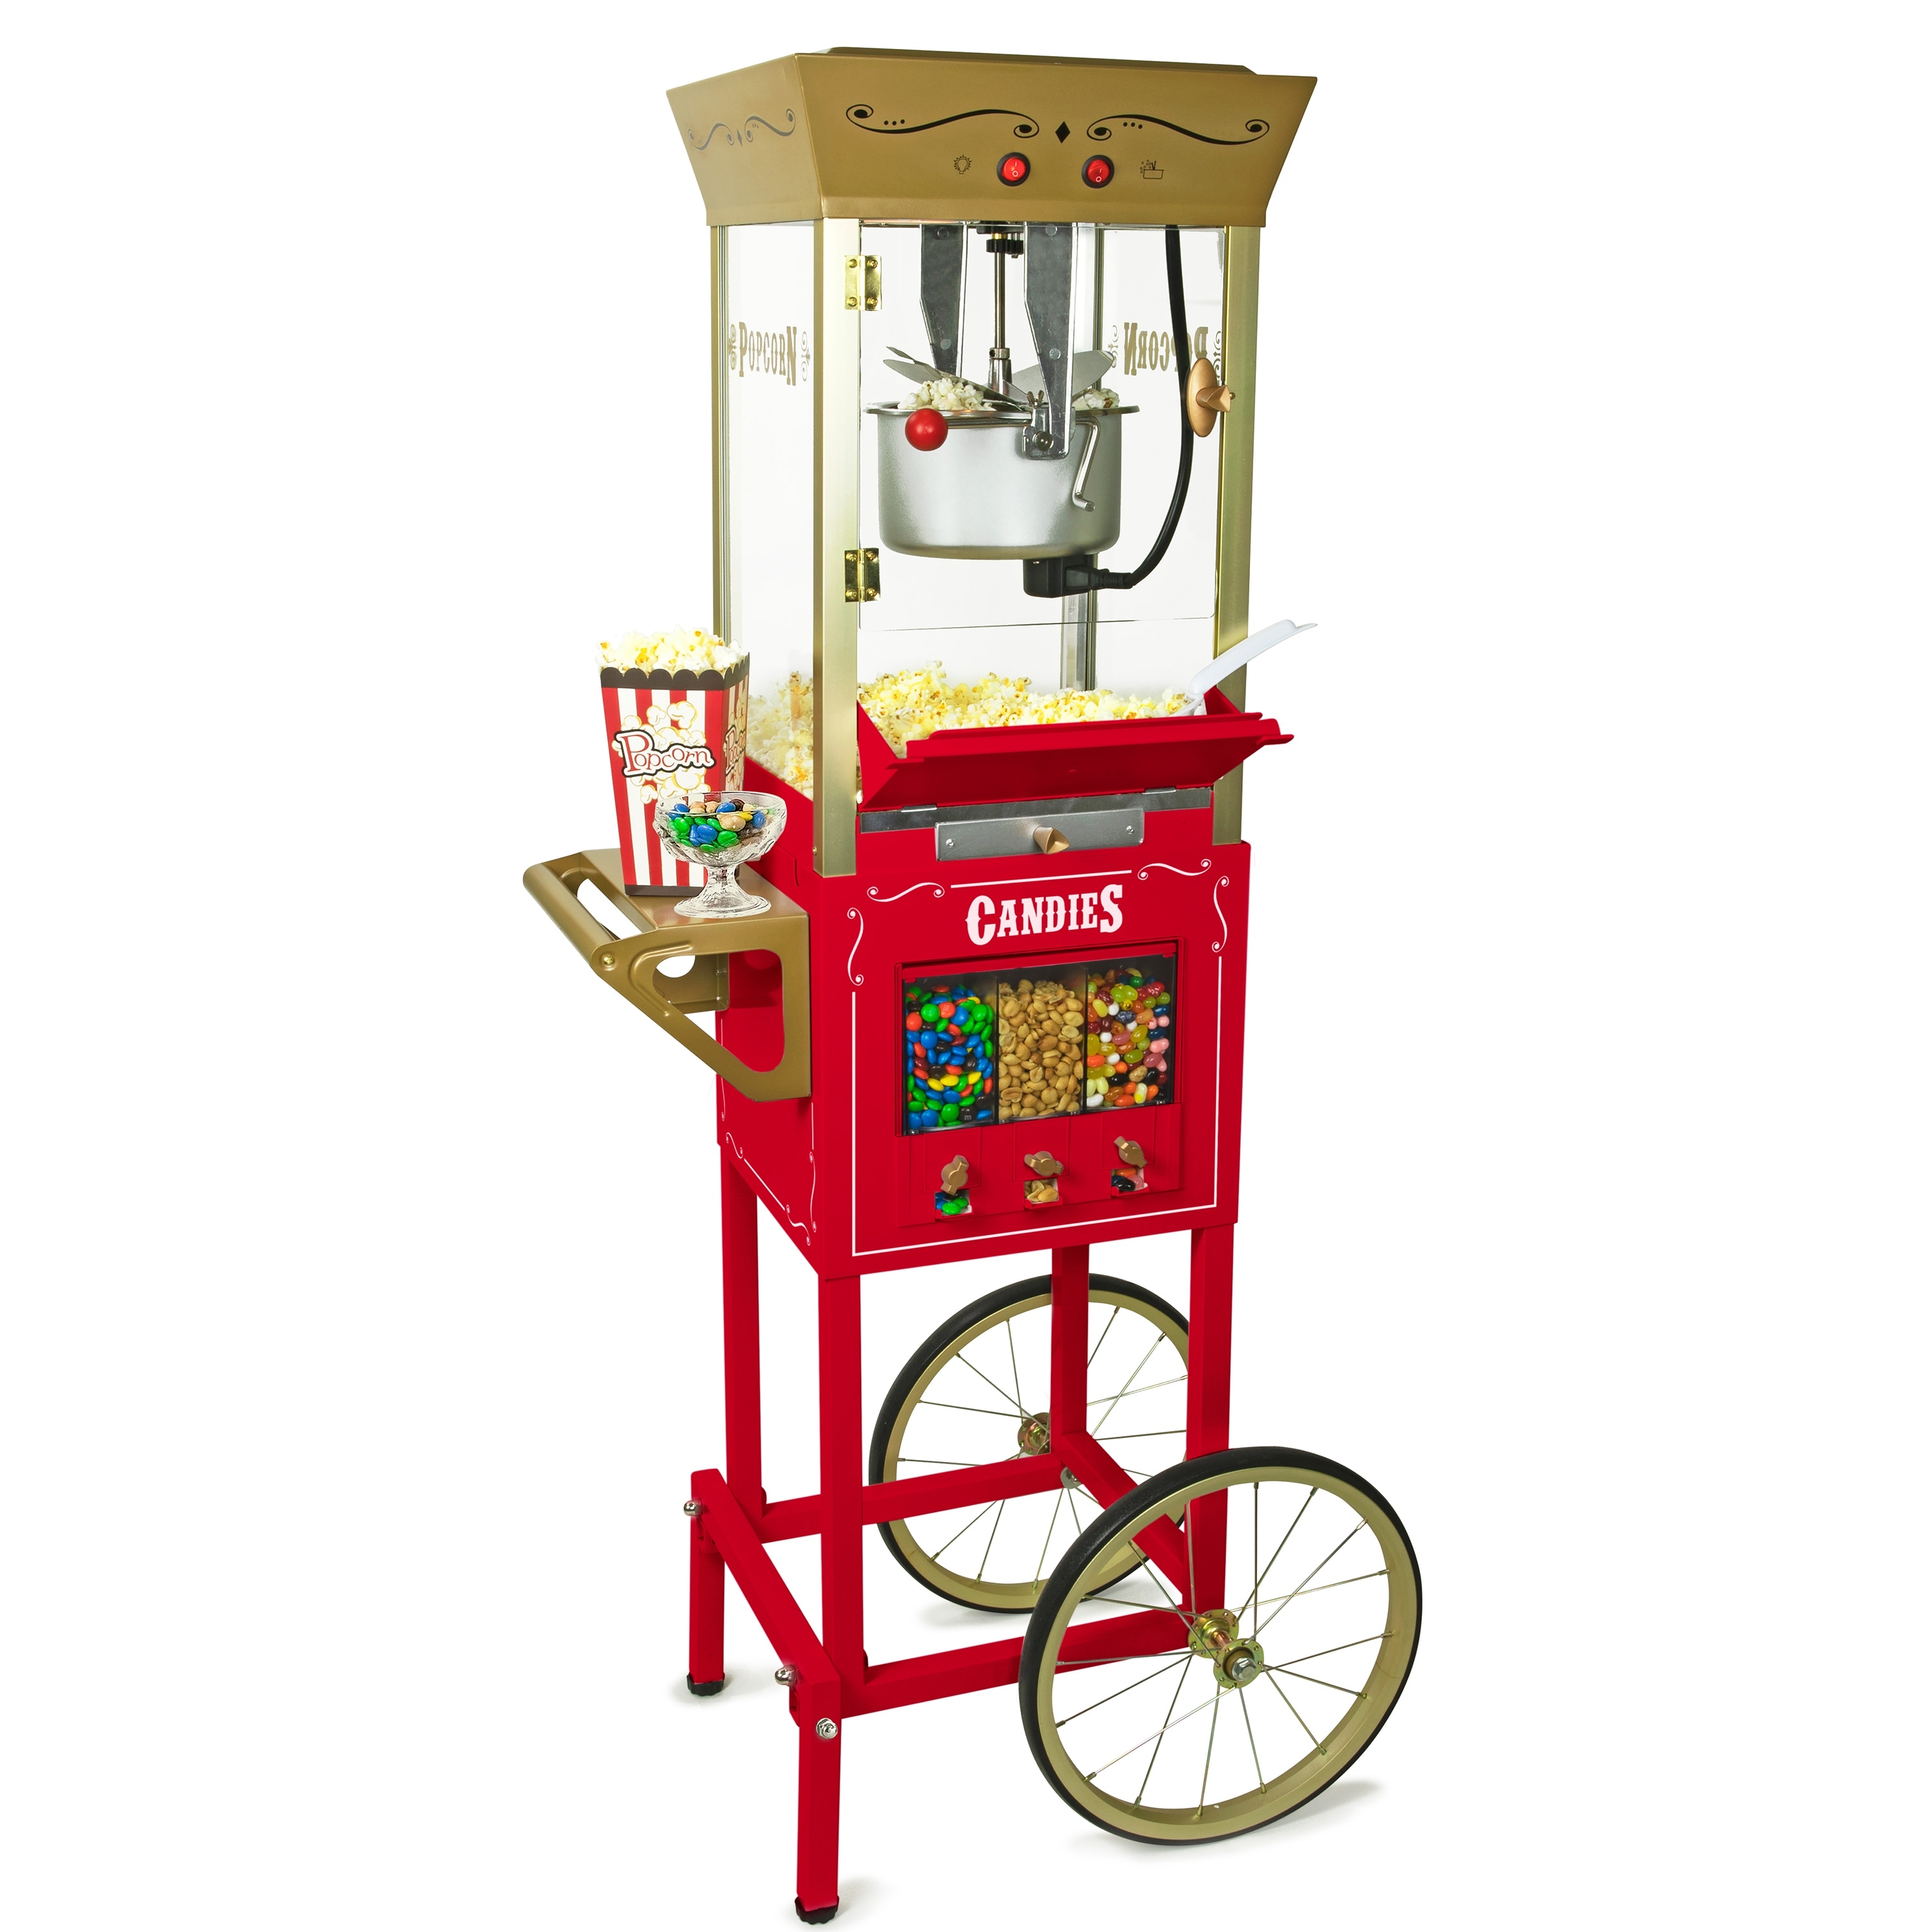 https://ak1.ostkcdn.com/images/products/is/images/direct/1621559168ec5987a6563fcf8f9dff8f2cf59ee6/Nostalgia-53-Inch-Popcorn-Cart-with-Candy-Dispenser.jpg